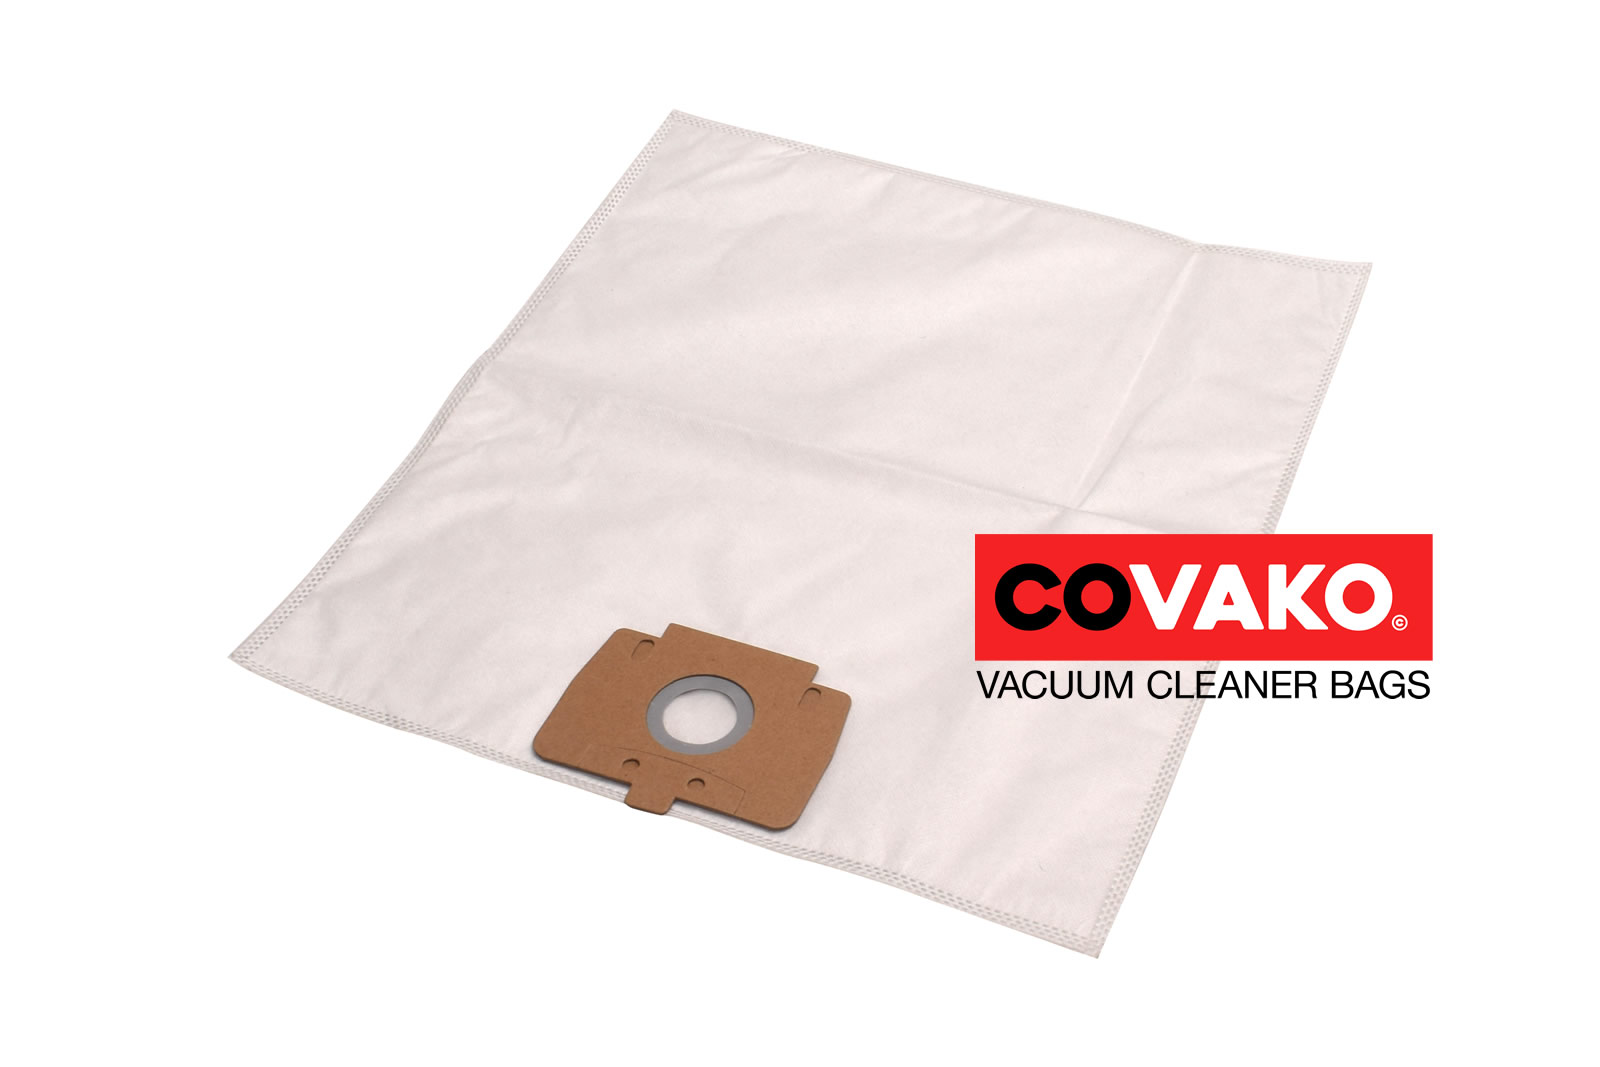 Ecolab S 152 / Synthesis - Ecolab vacuum cleaner bags